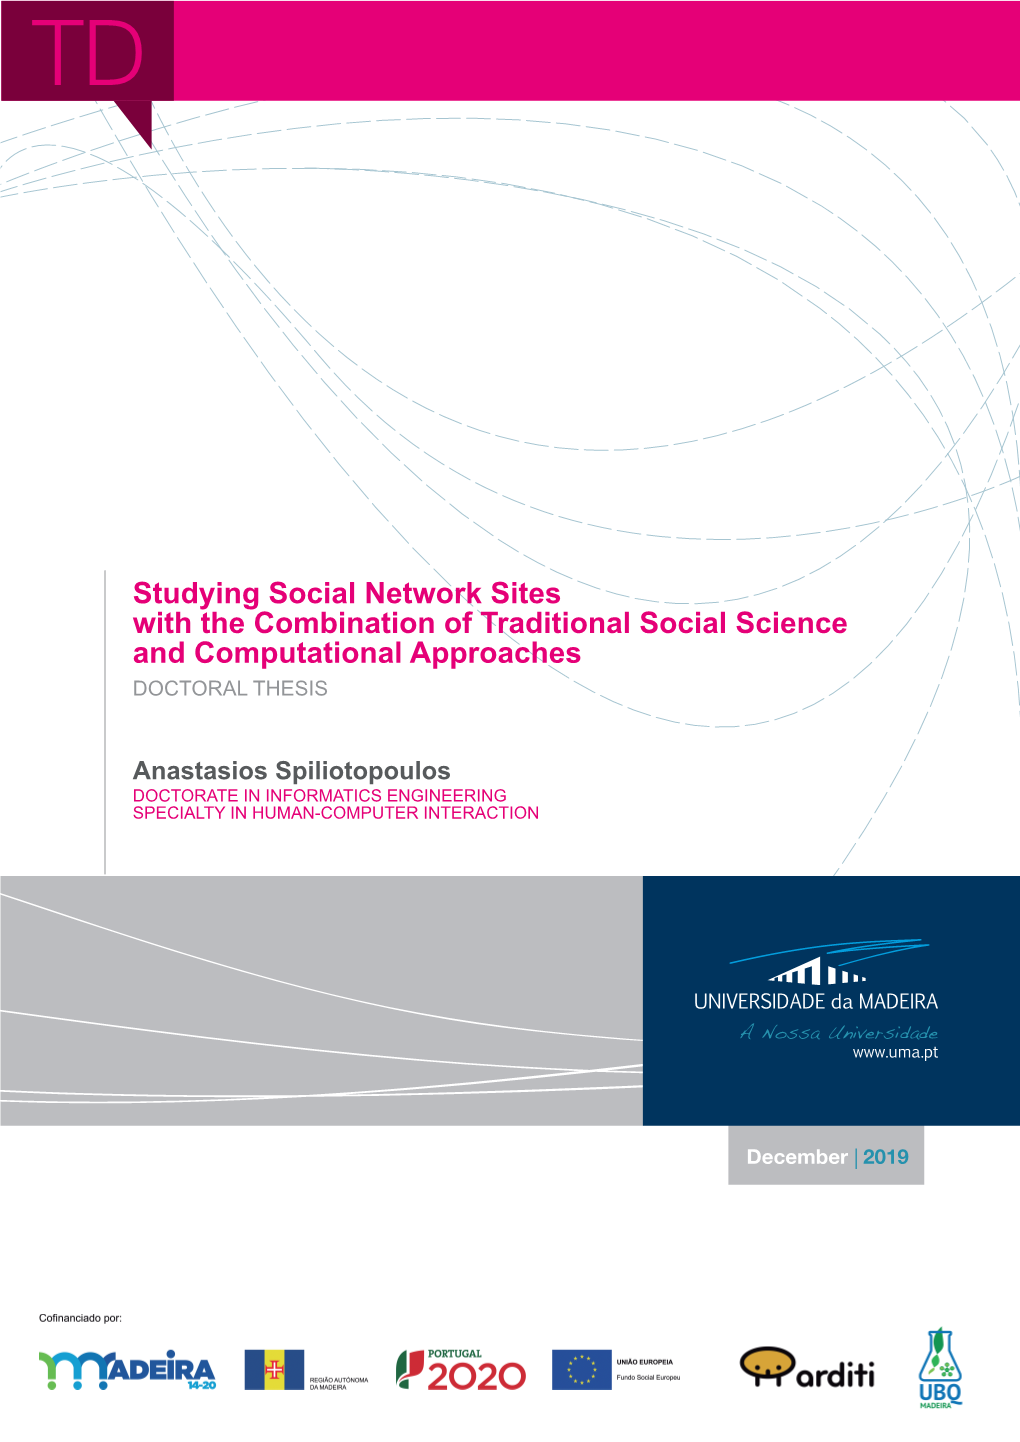 Studying Social Network Sites with the Combination of Traditional Social Science and Computational Approaches DOCTORAL THESIS